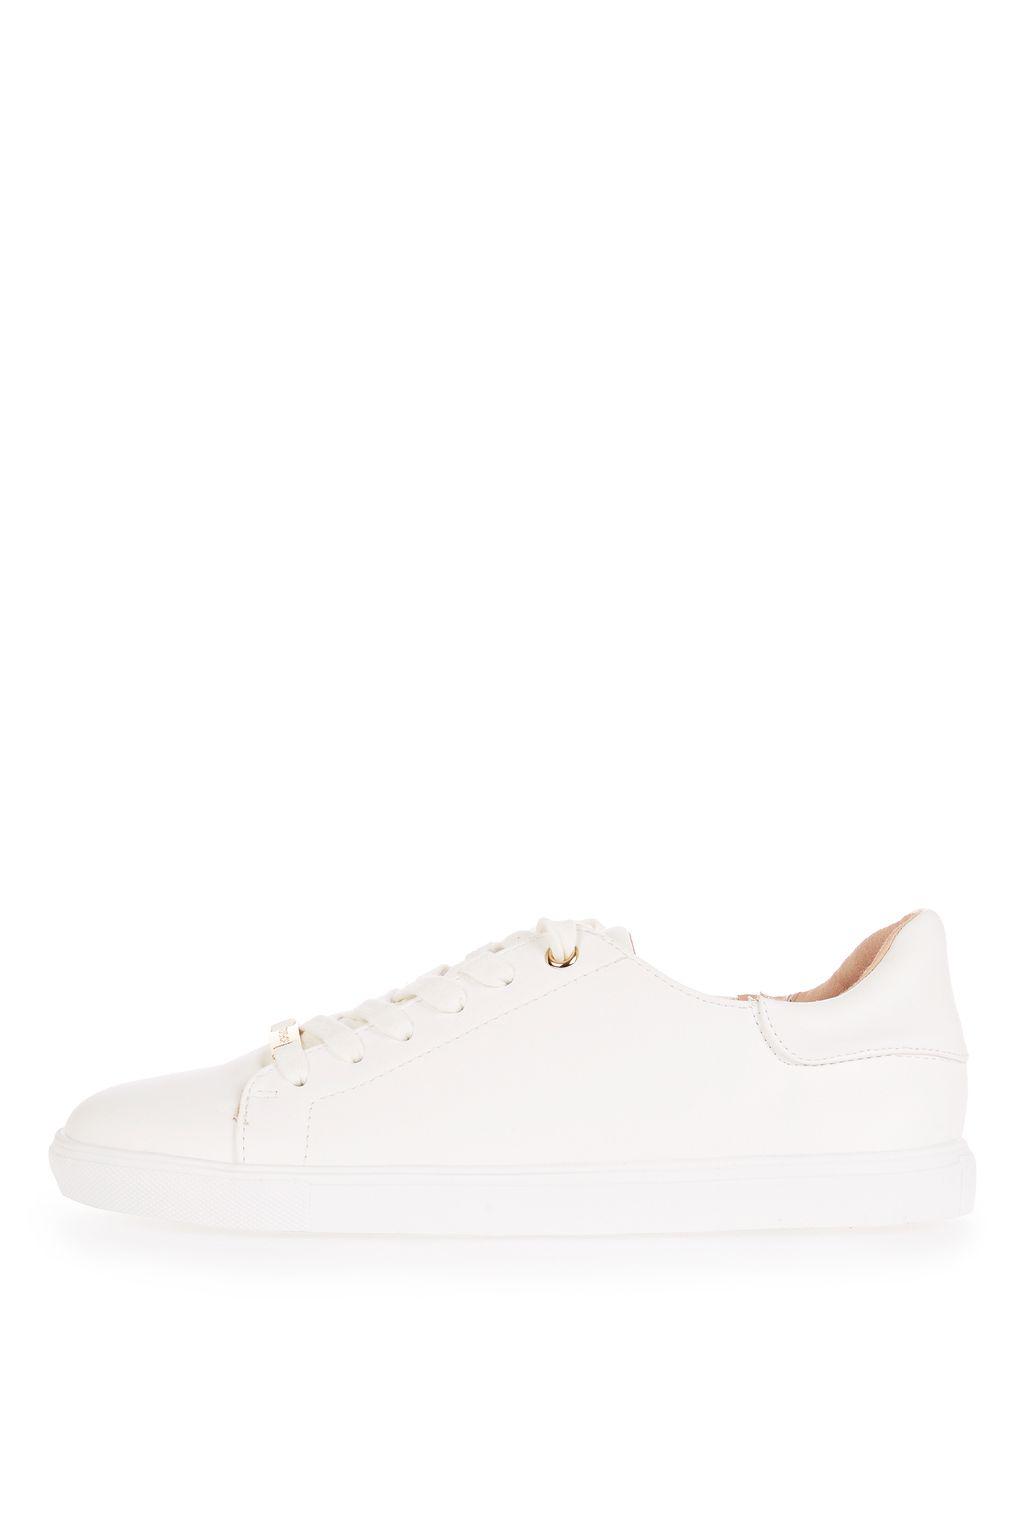 TOPSHOP Denim Catseye Lace Up Trainers 